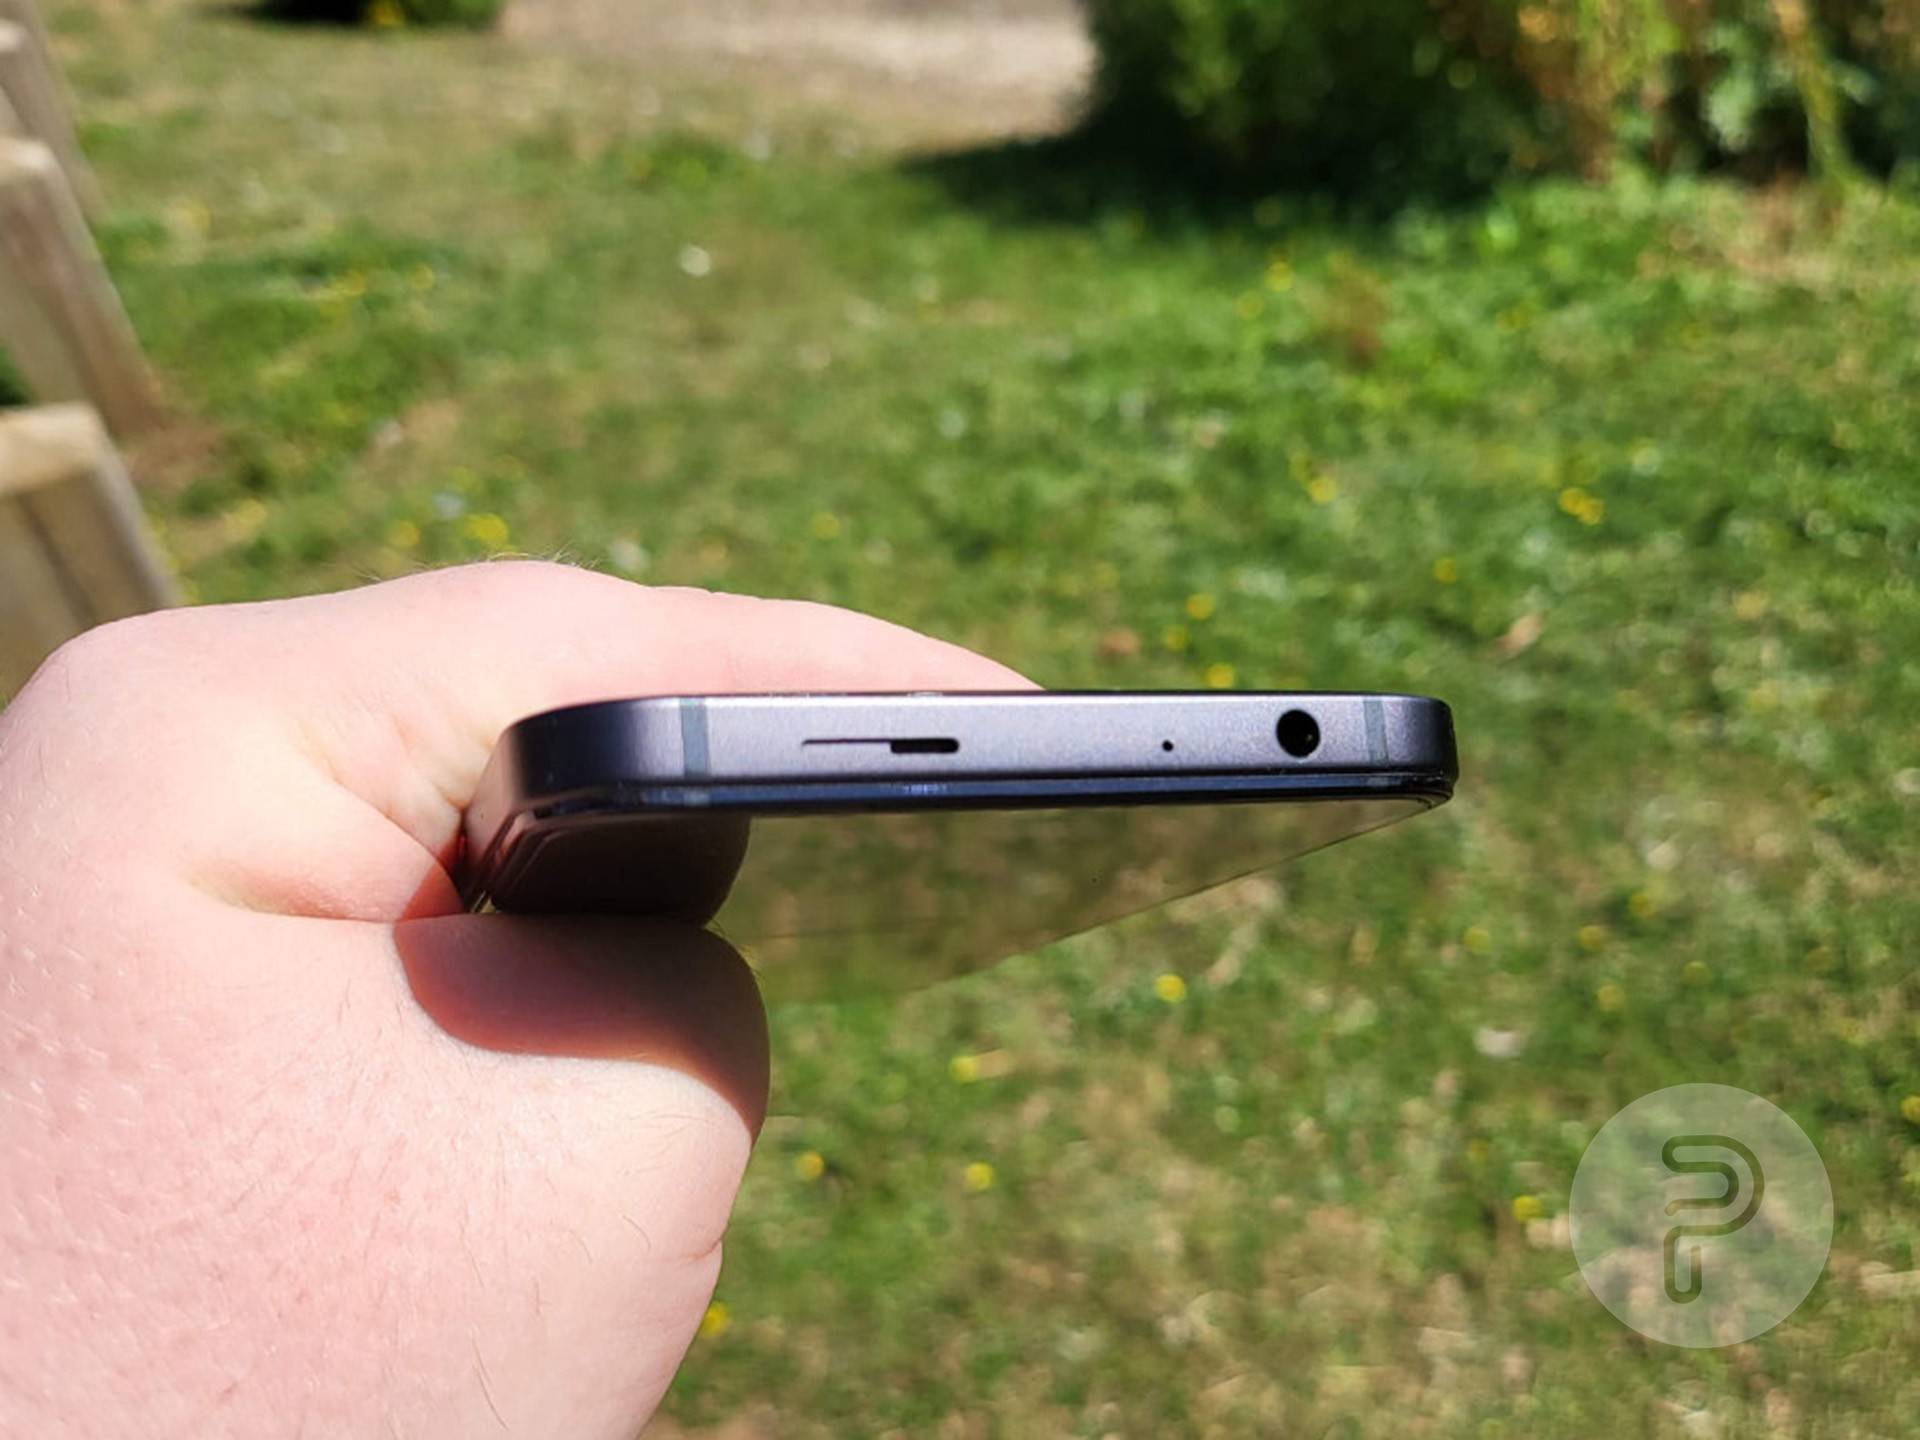 nubia REDMAGIC 7S Pro top of the device showing the 3.5mm headphone jack